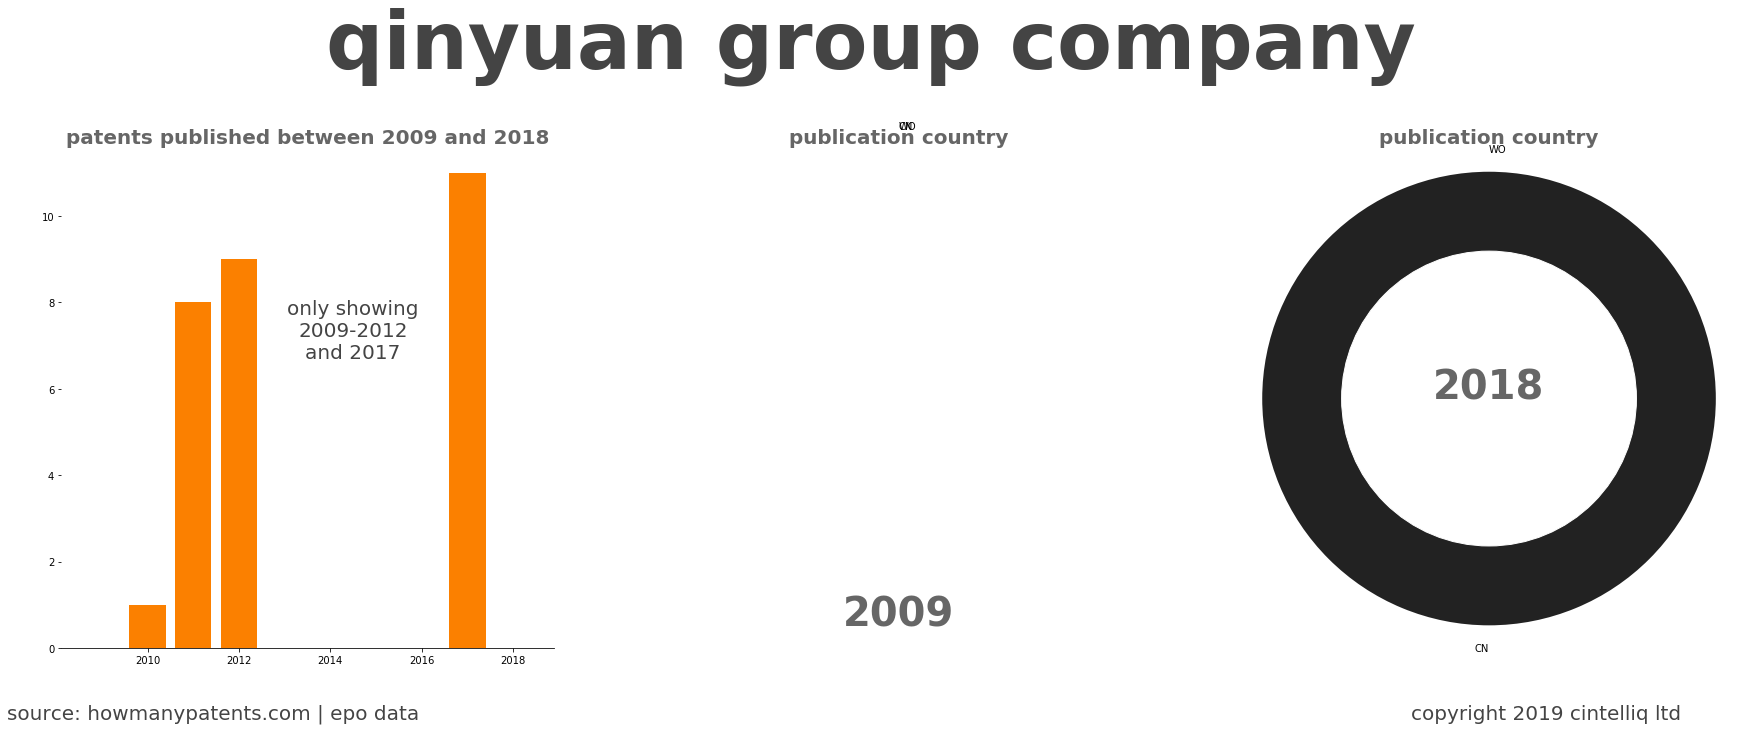 summary of patents for Qinyuan Group Company